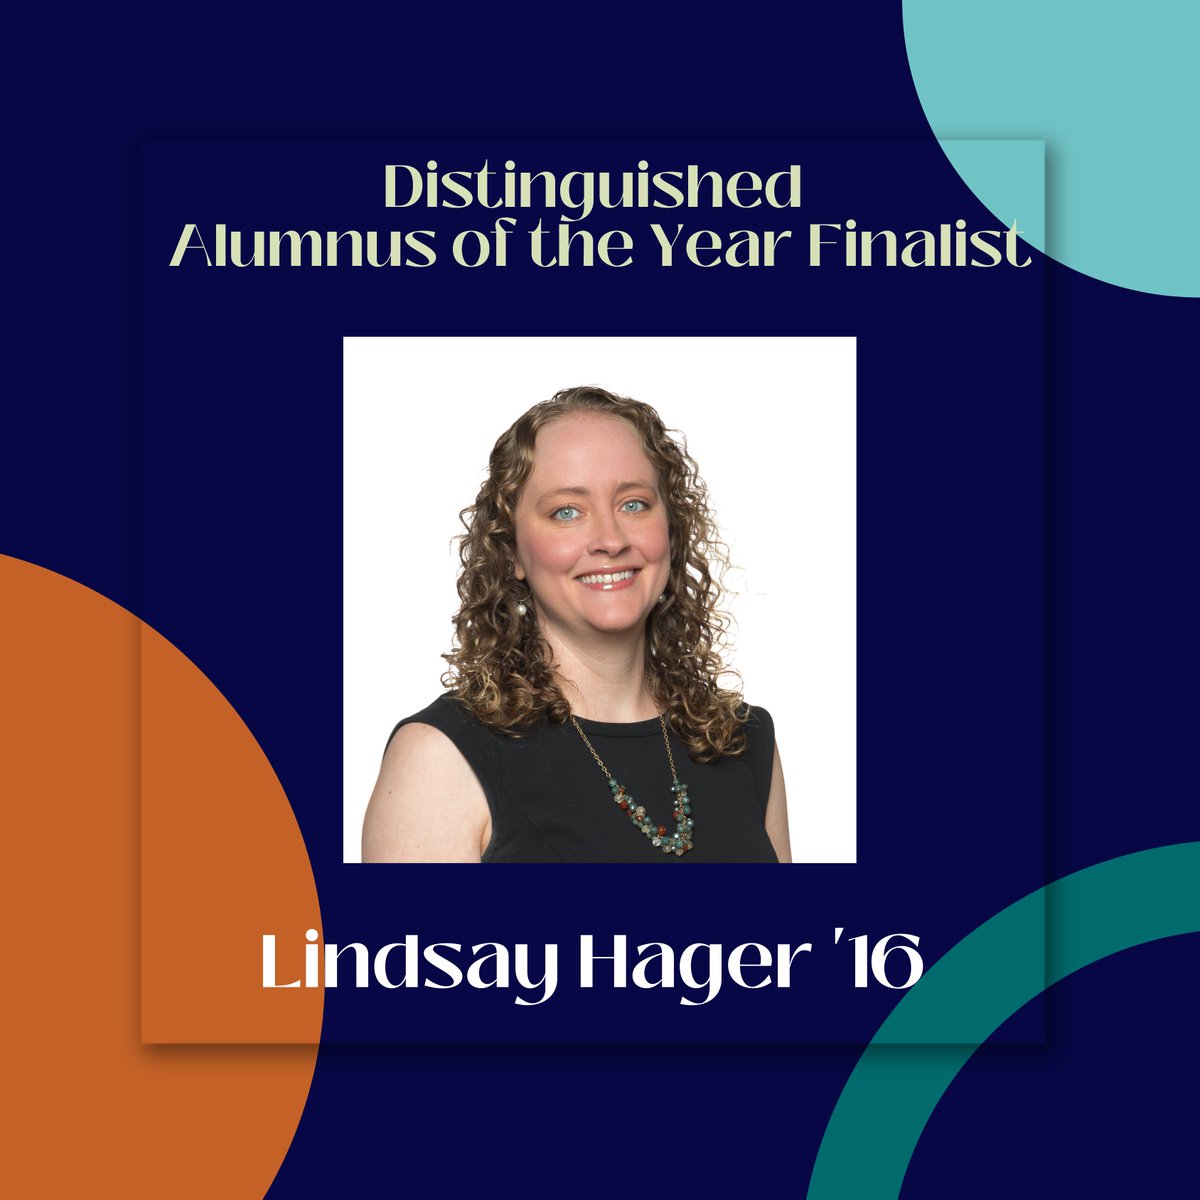 Lindsay Hager graduated in 2016 from Nashville State Community College with an A.S. n Political Science. Lindsay currently works as the Assistant Director of the Student Success Center at @NashvilleState!

Join us on Oct 24th to learn more about Lindsay! event.gives/falconawards